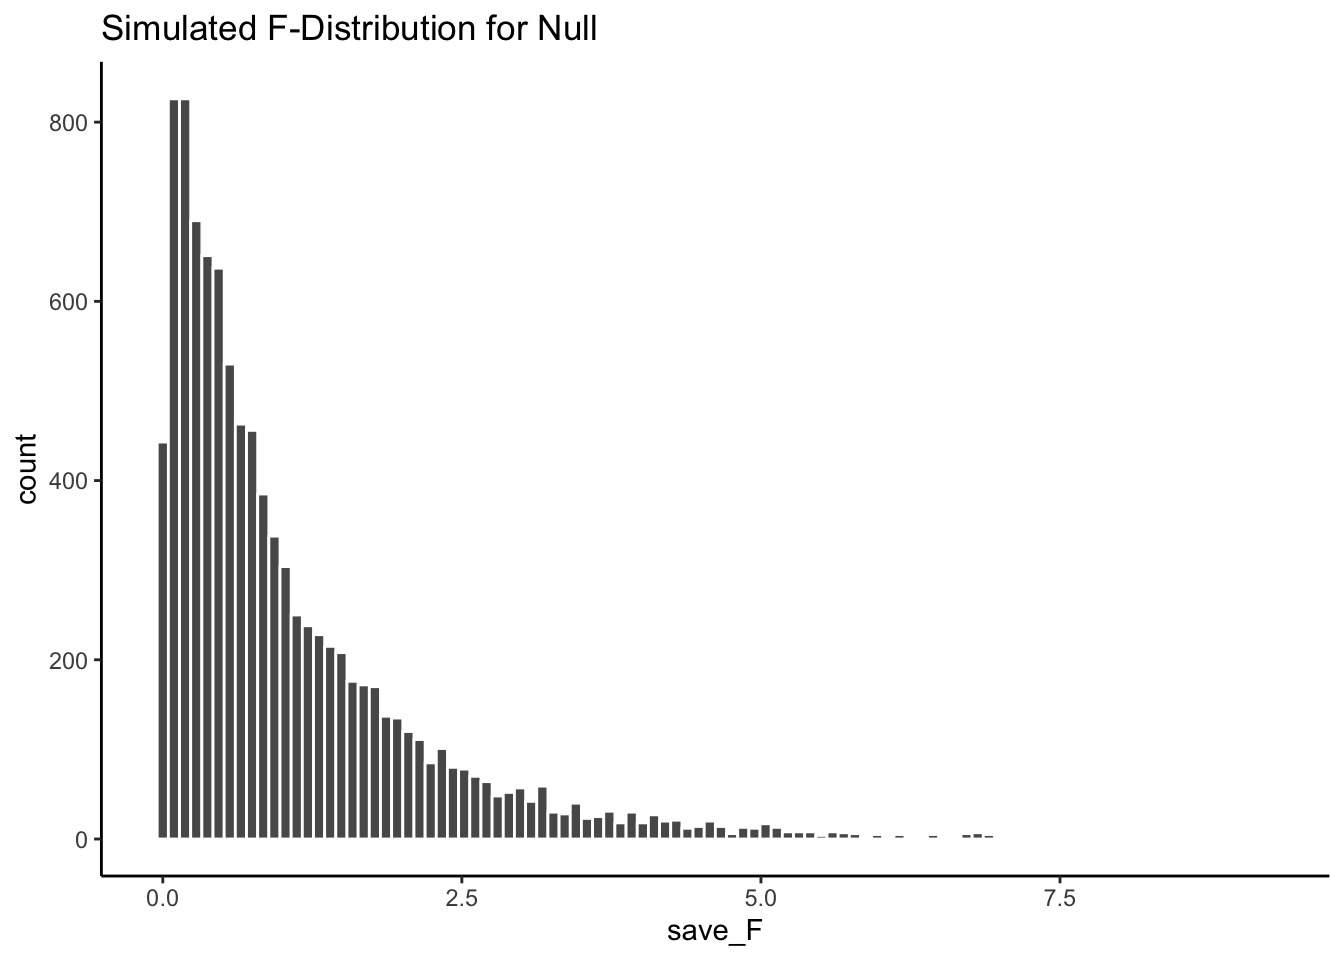 A simulation of 10,000 experiments from a null distribution where there is no differences. The histogram shows 10,000 $F$-values, one for each simulation. These are values that F can take in this situation. All of these $F$-values were produced by random sampling error.